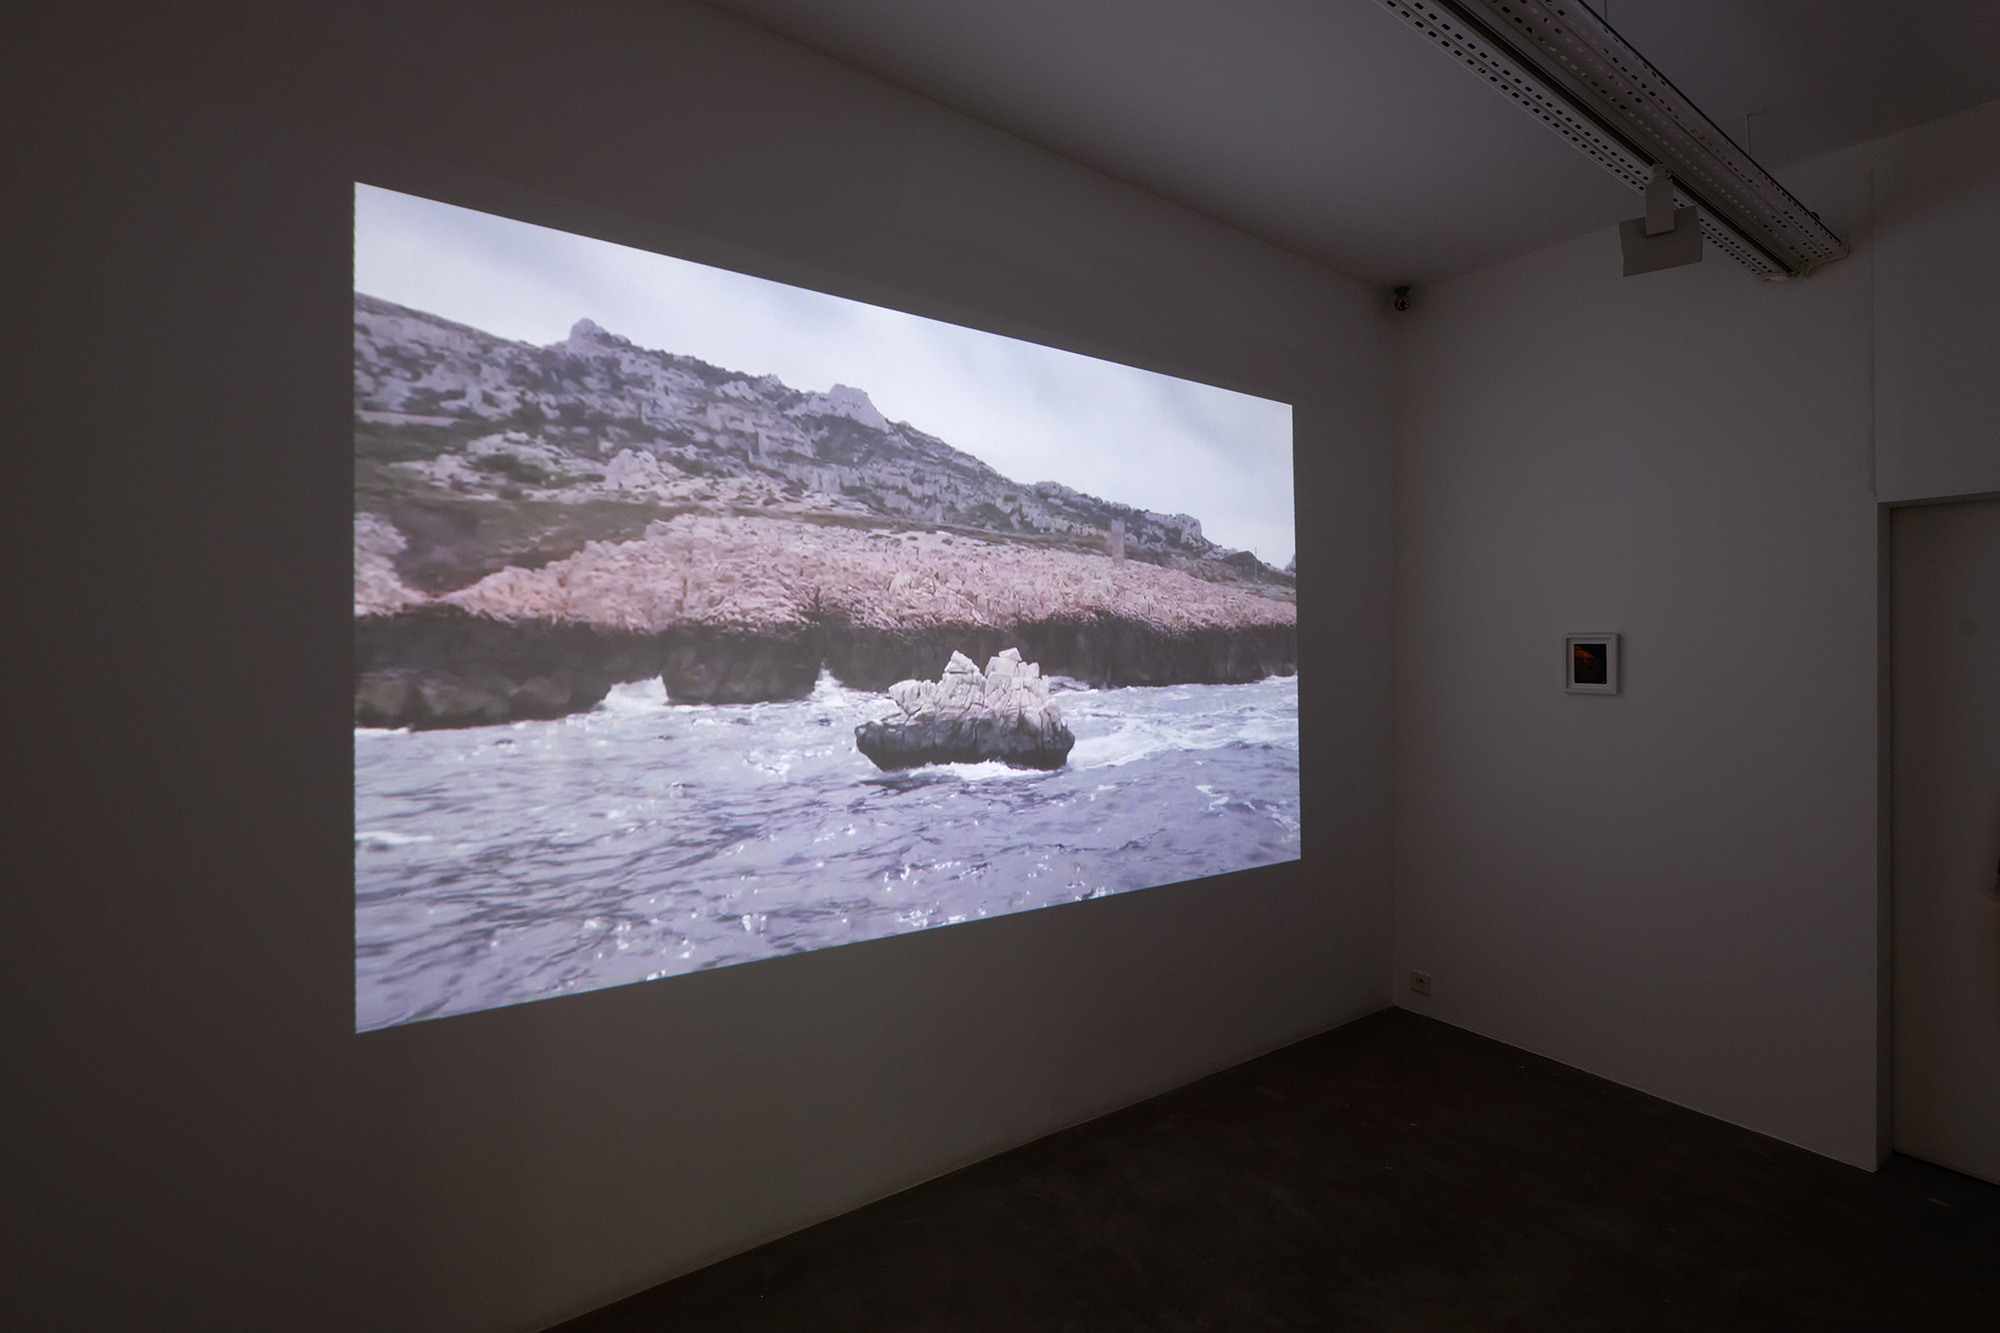 Installation image for Always the Sun, at Galerie Georges-Philippe & Nathalie Vallois